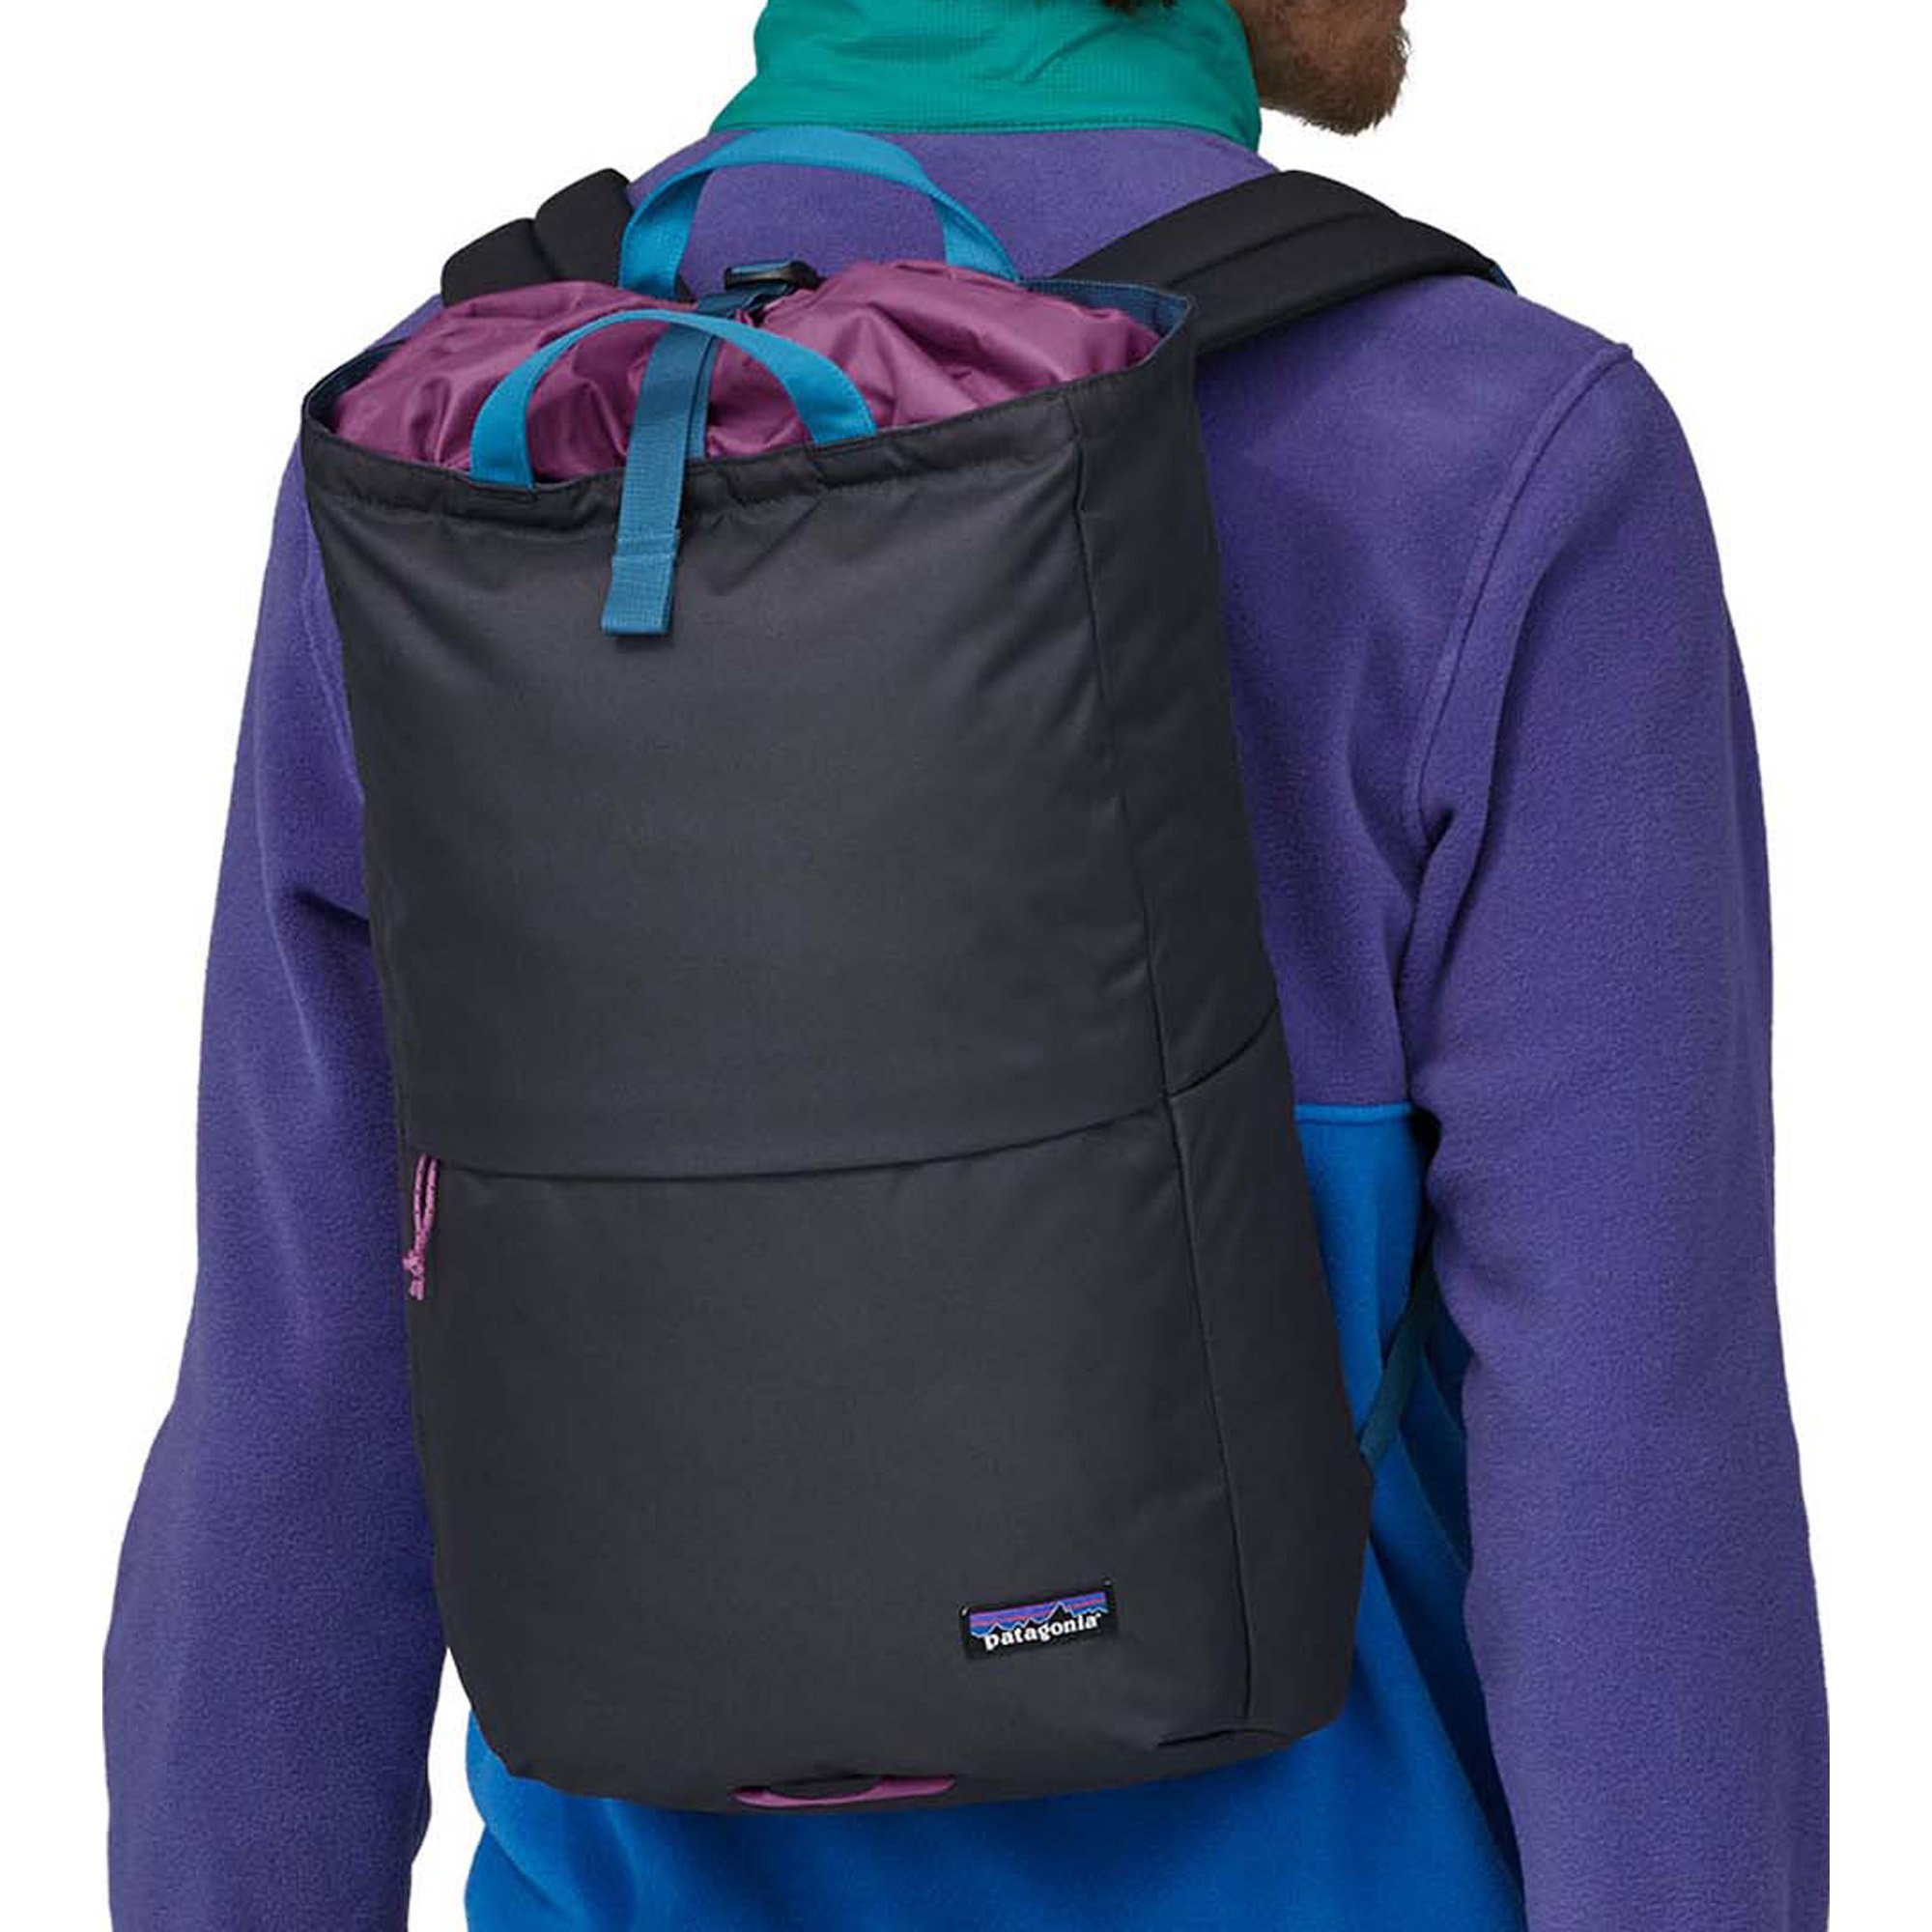 Patagonia Fieldsmith Linked 25 Backpack/Day Pack